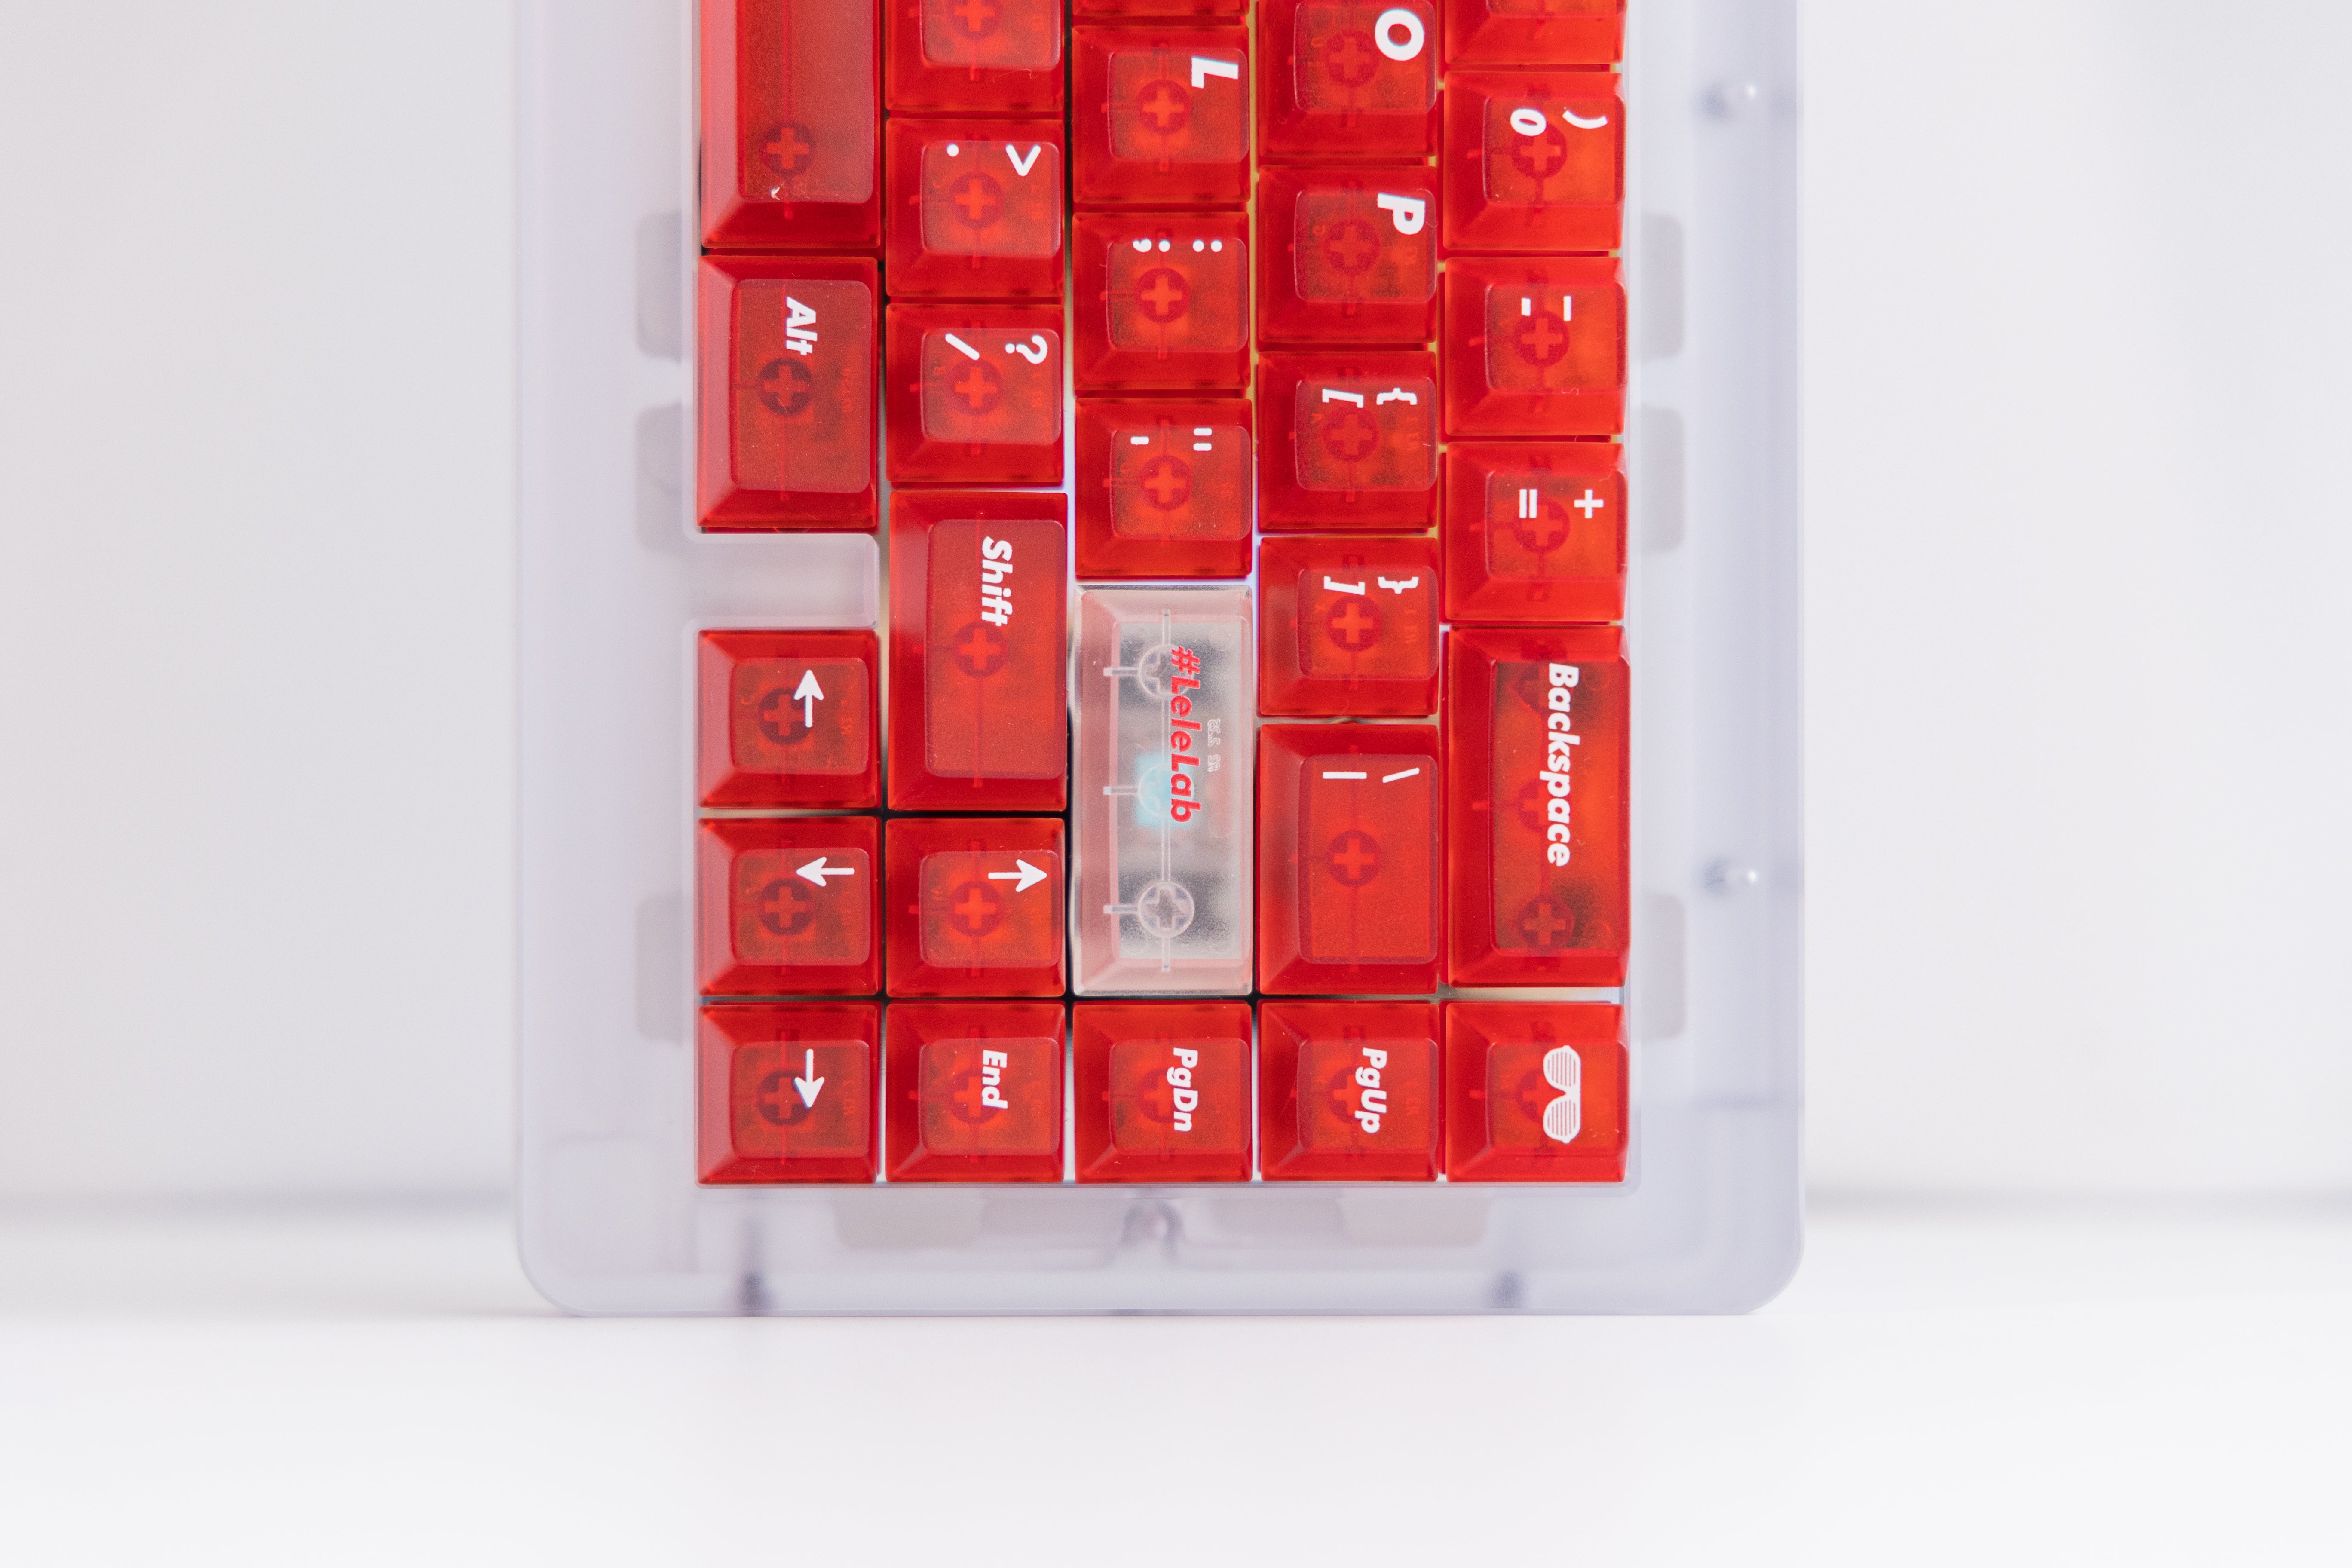 [In Stock] LeleLab Supsup Classic Red Keycap Set